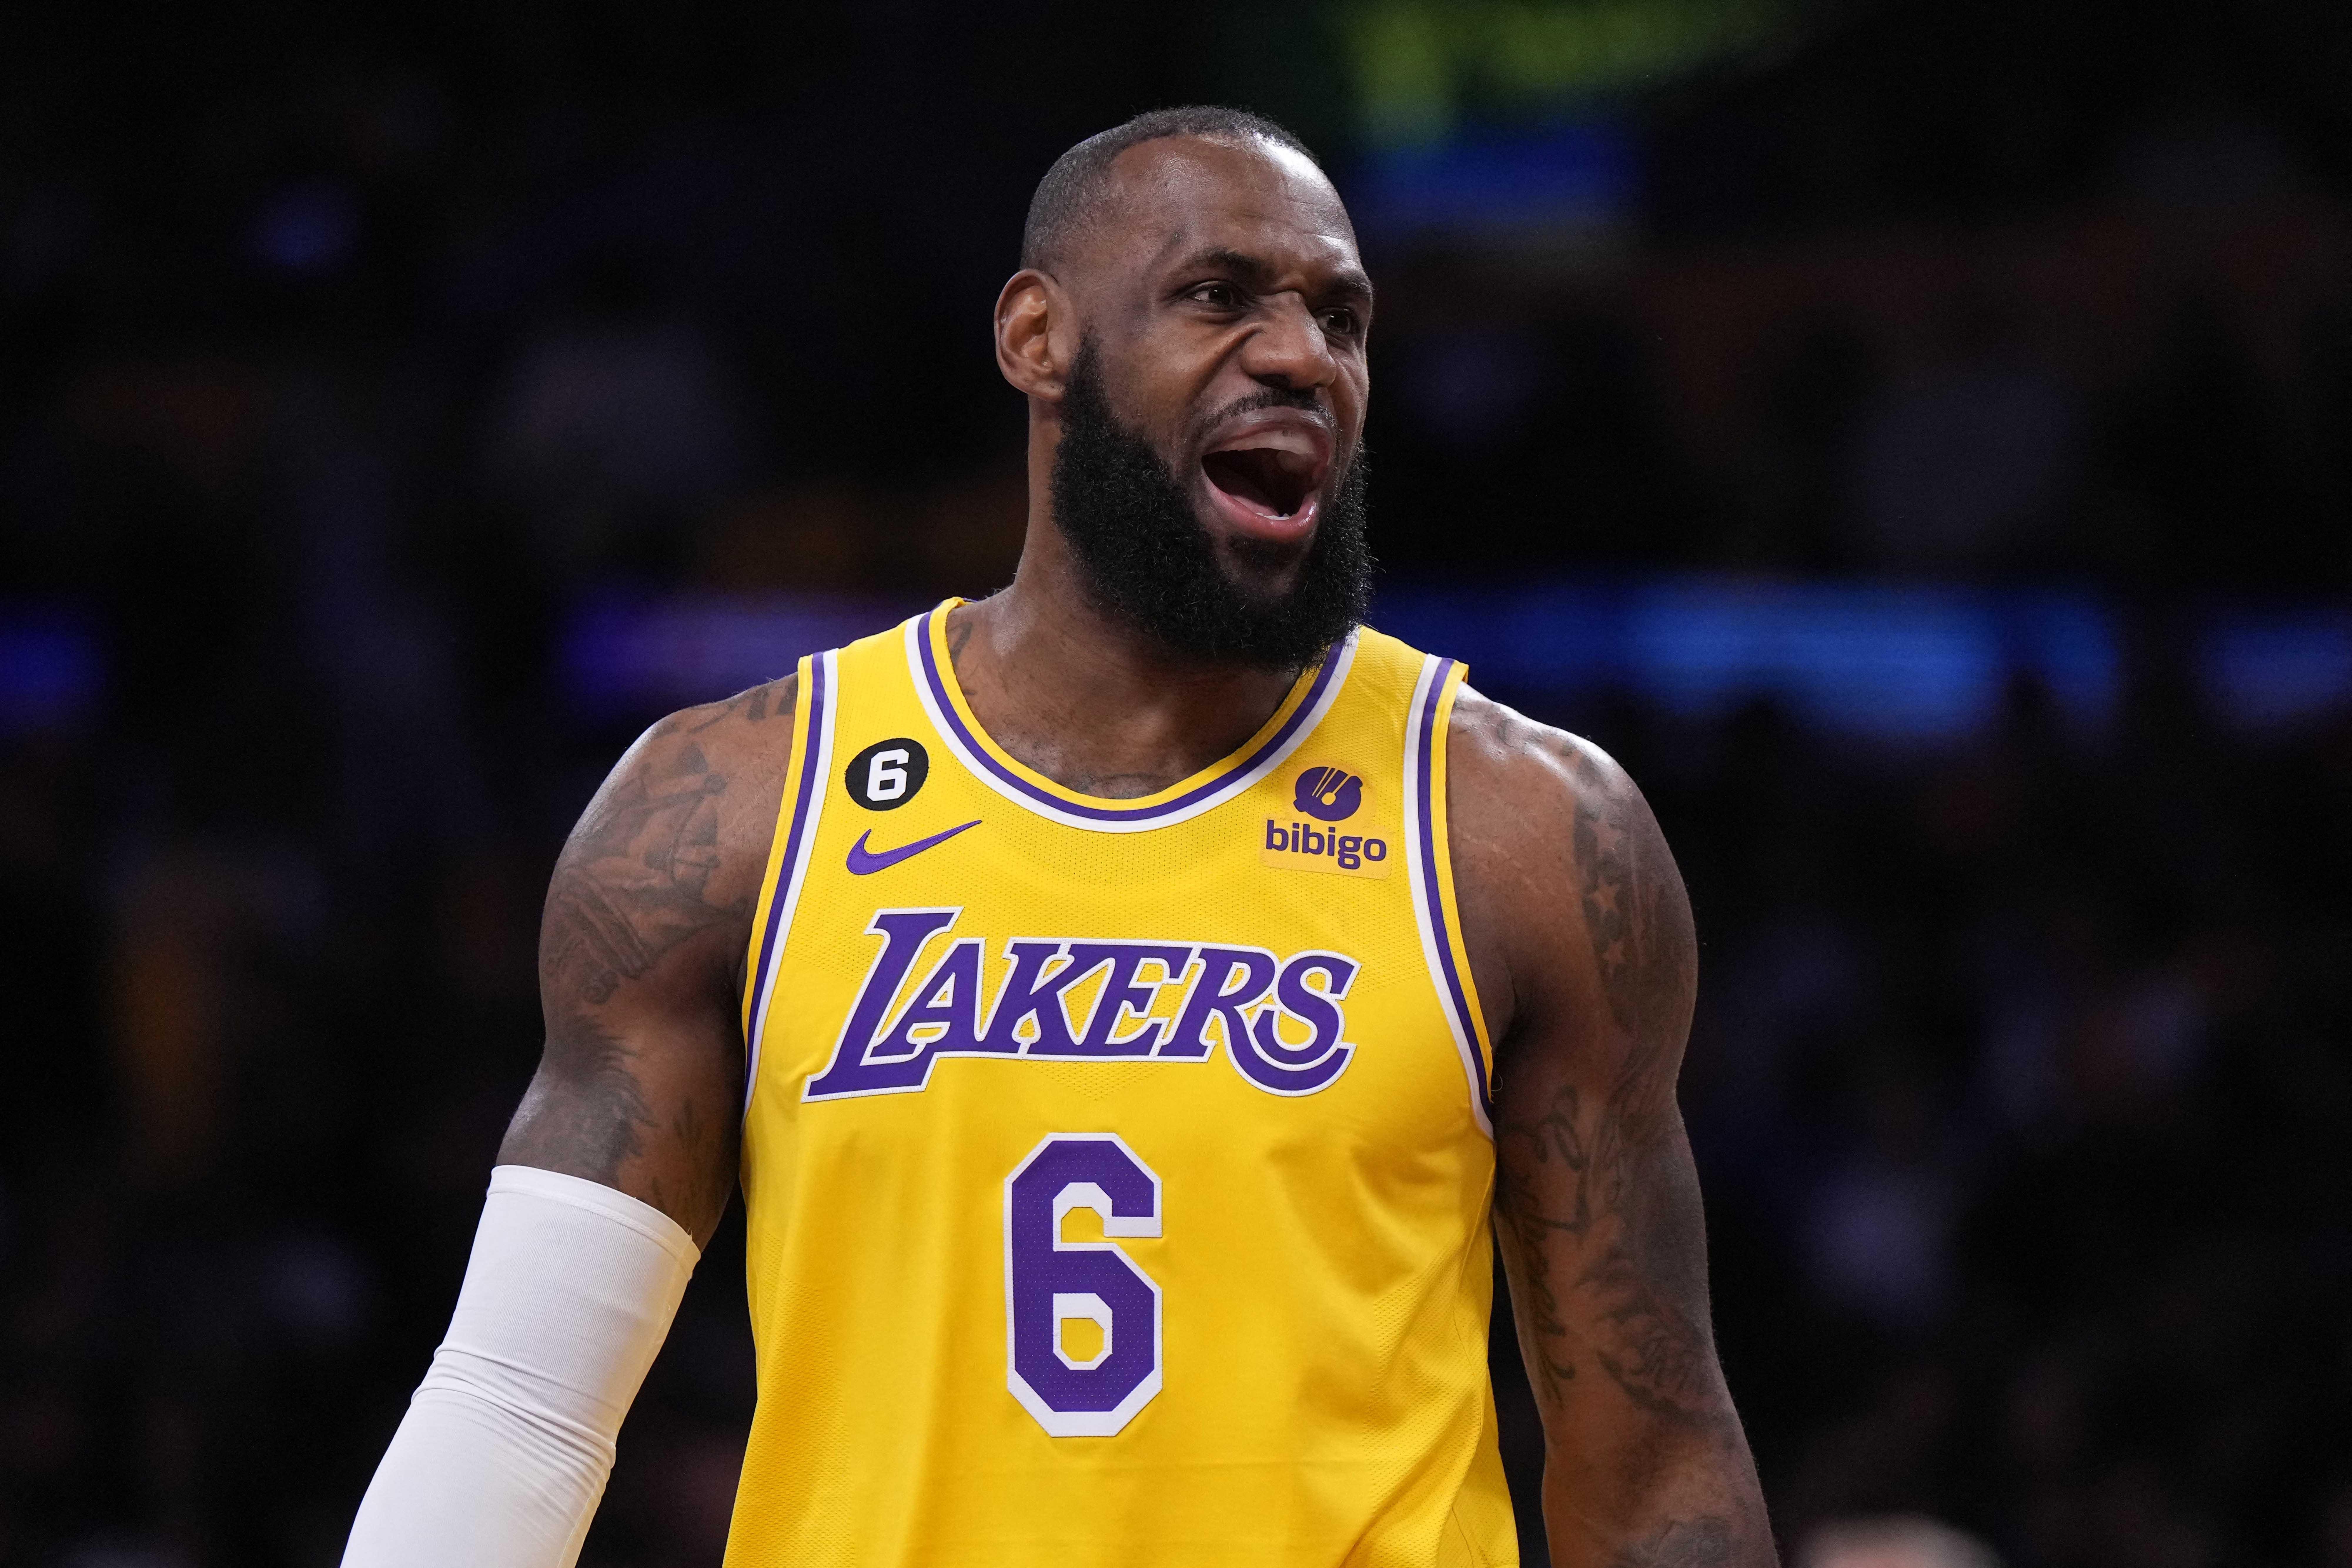 LeBron James takes over in fourth quarter to lead Lakers past